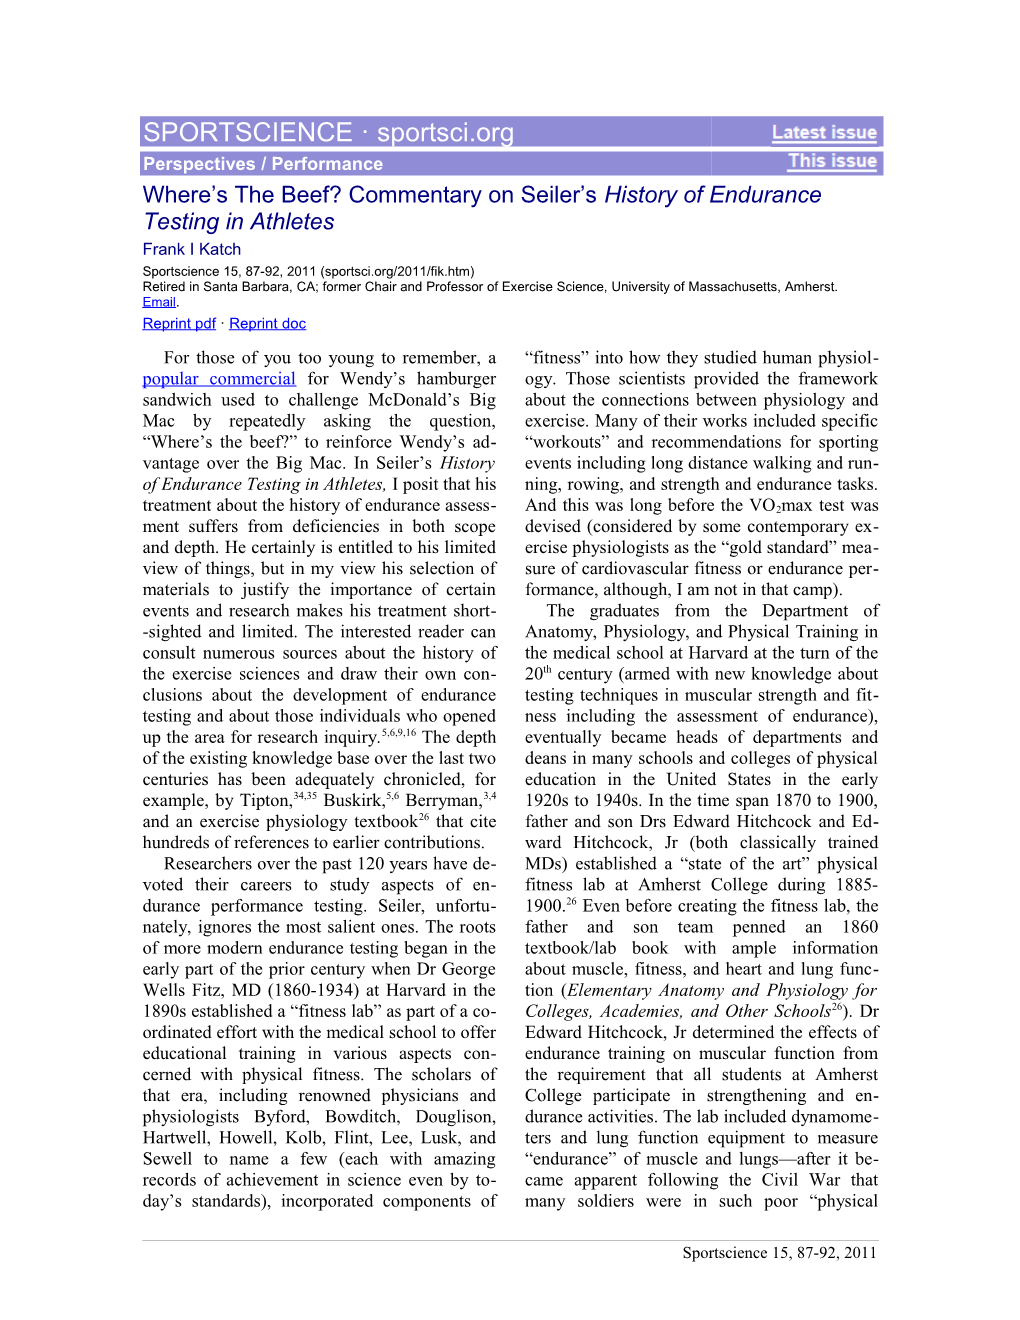 Commentary on Seiler S History of Endurance Testing in Athletes